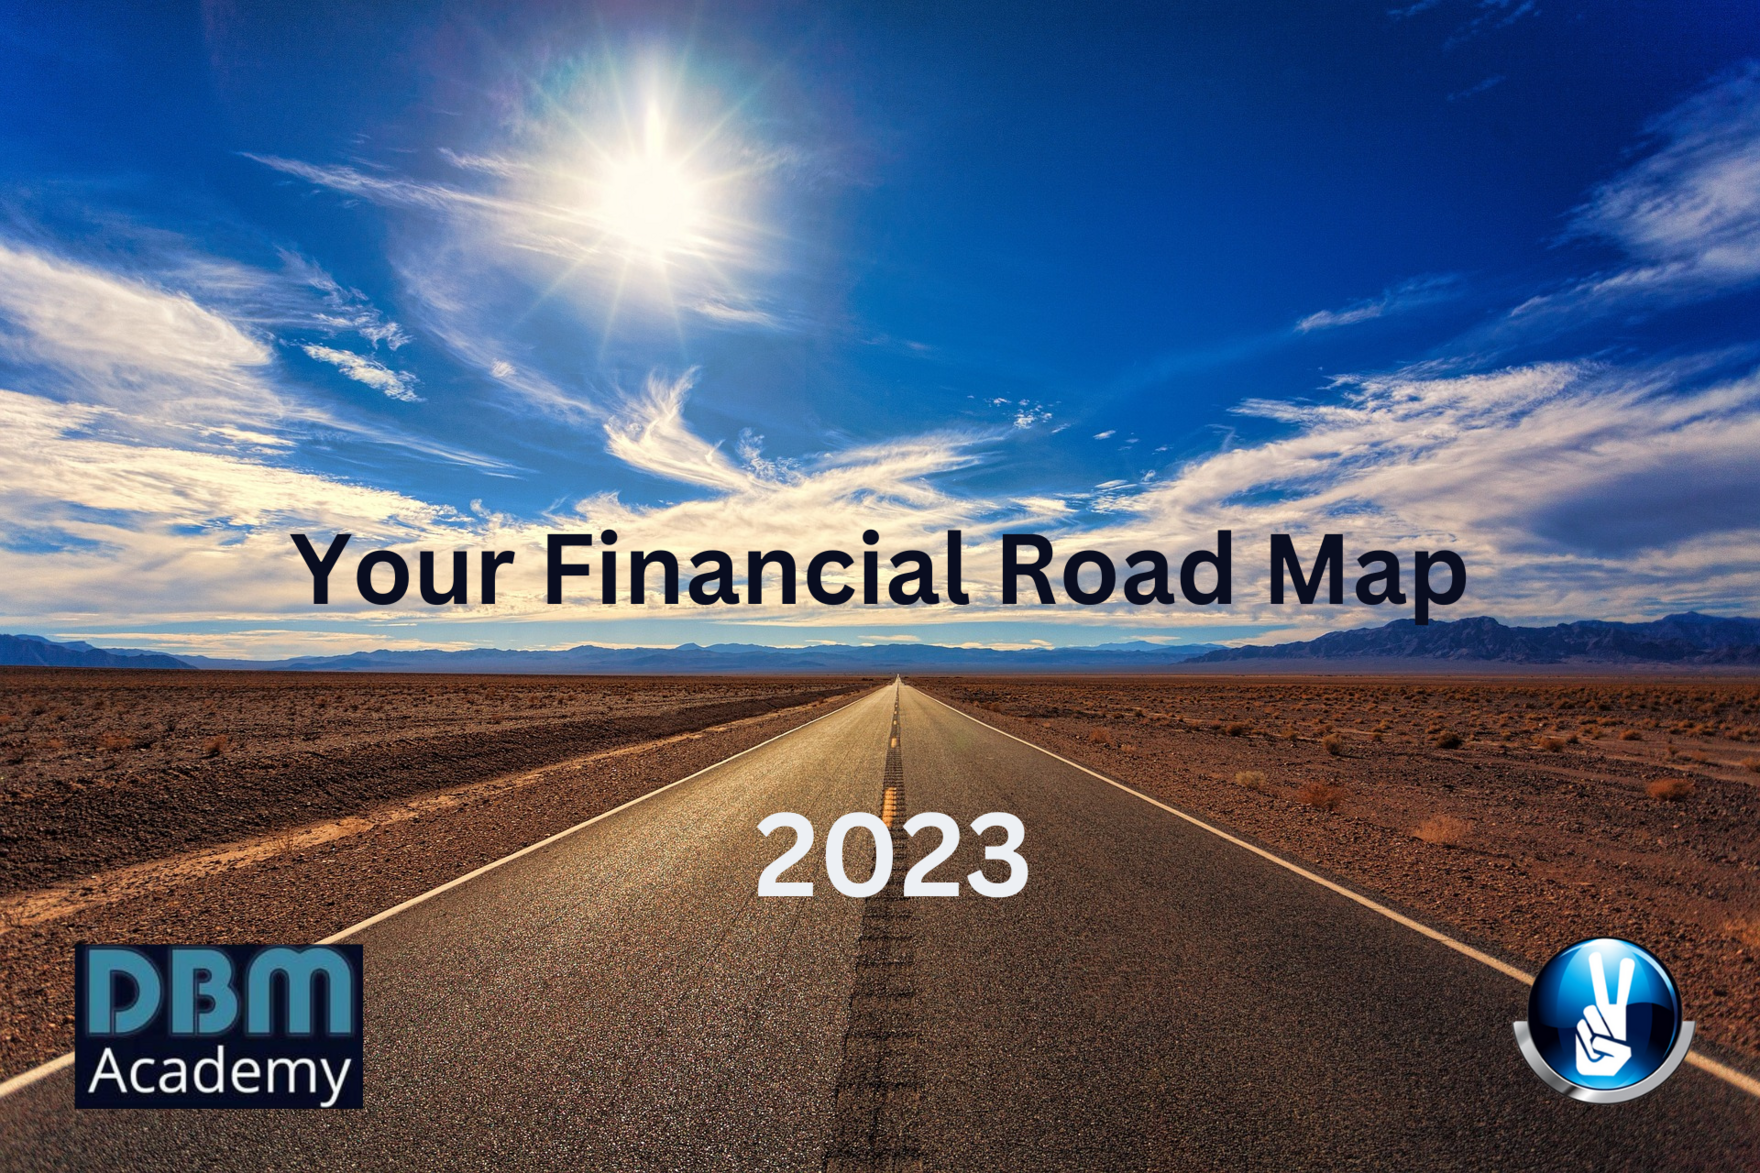 Your Financial Road Map 2023